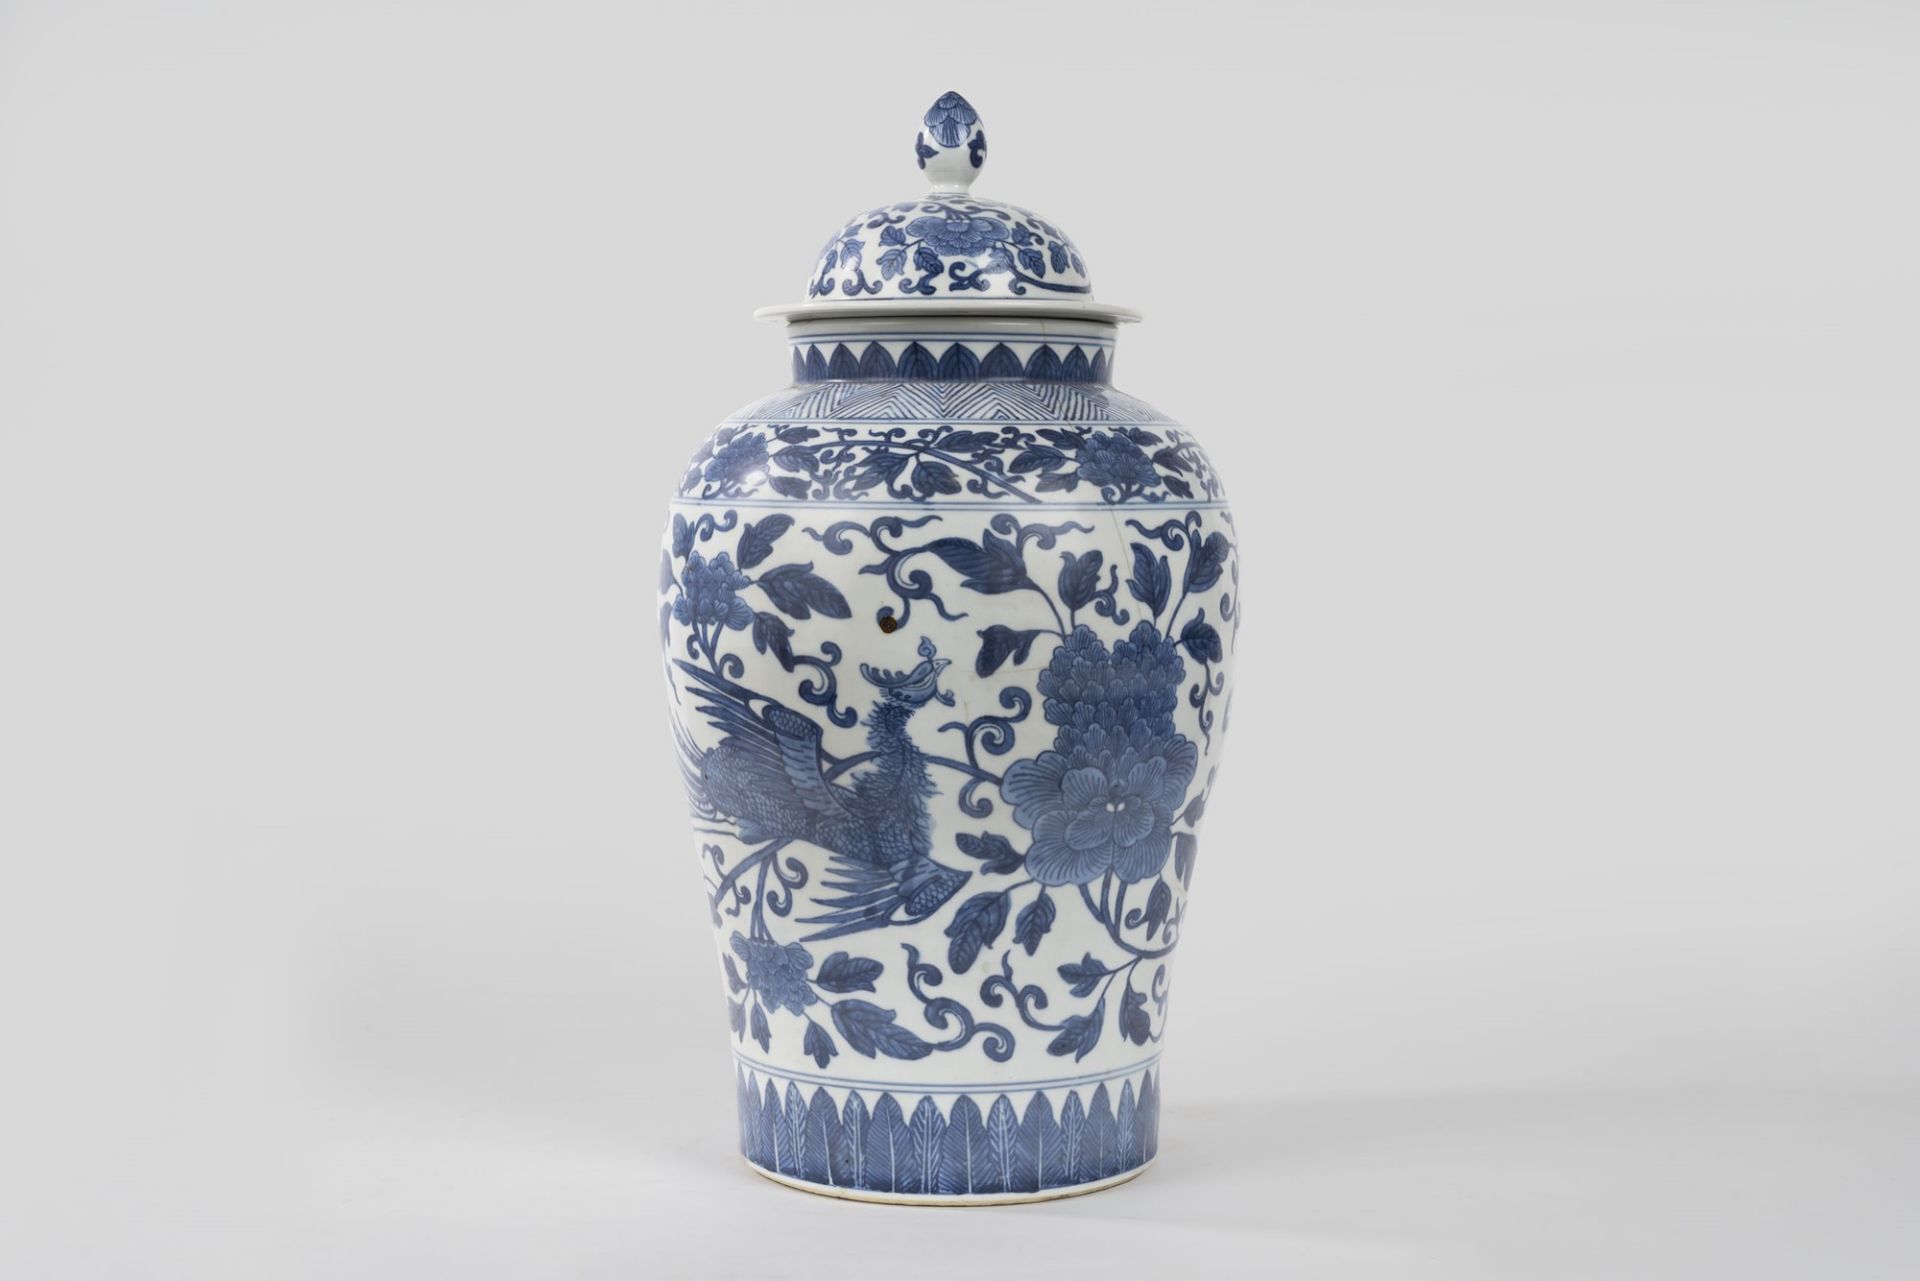 Blue and white porcelain vase with lid, China, 20th century - Image 2 of 3